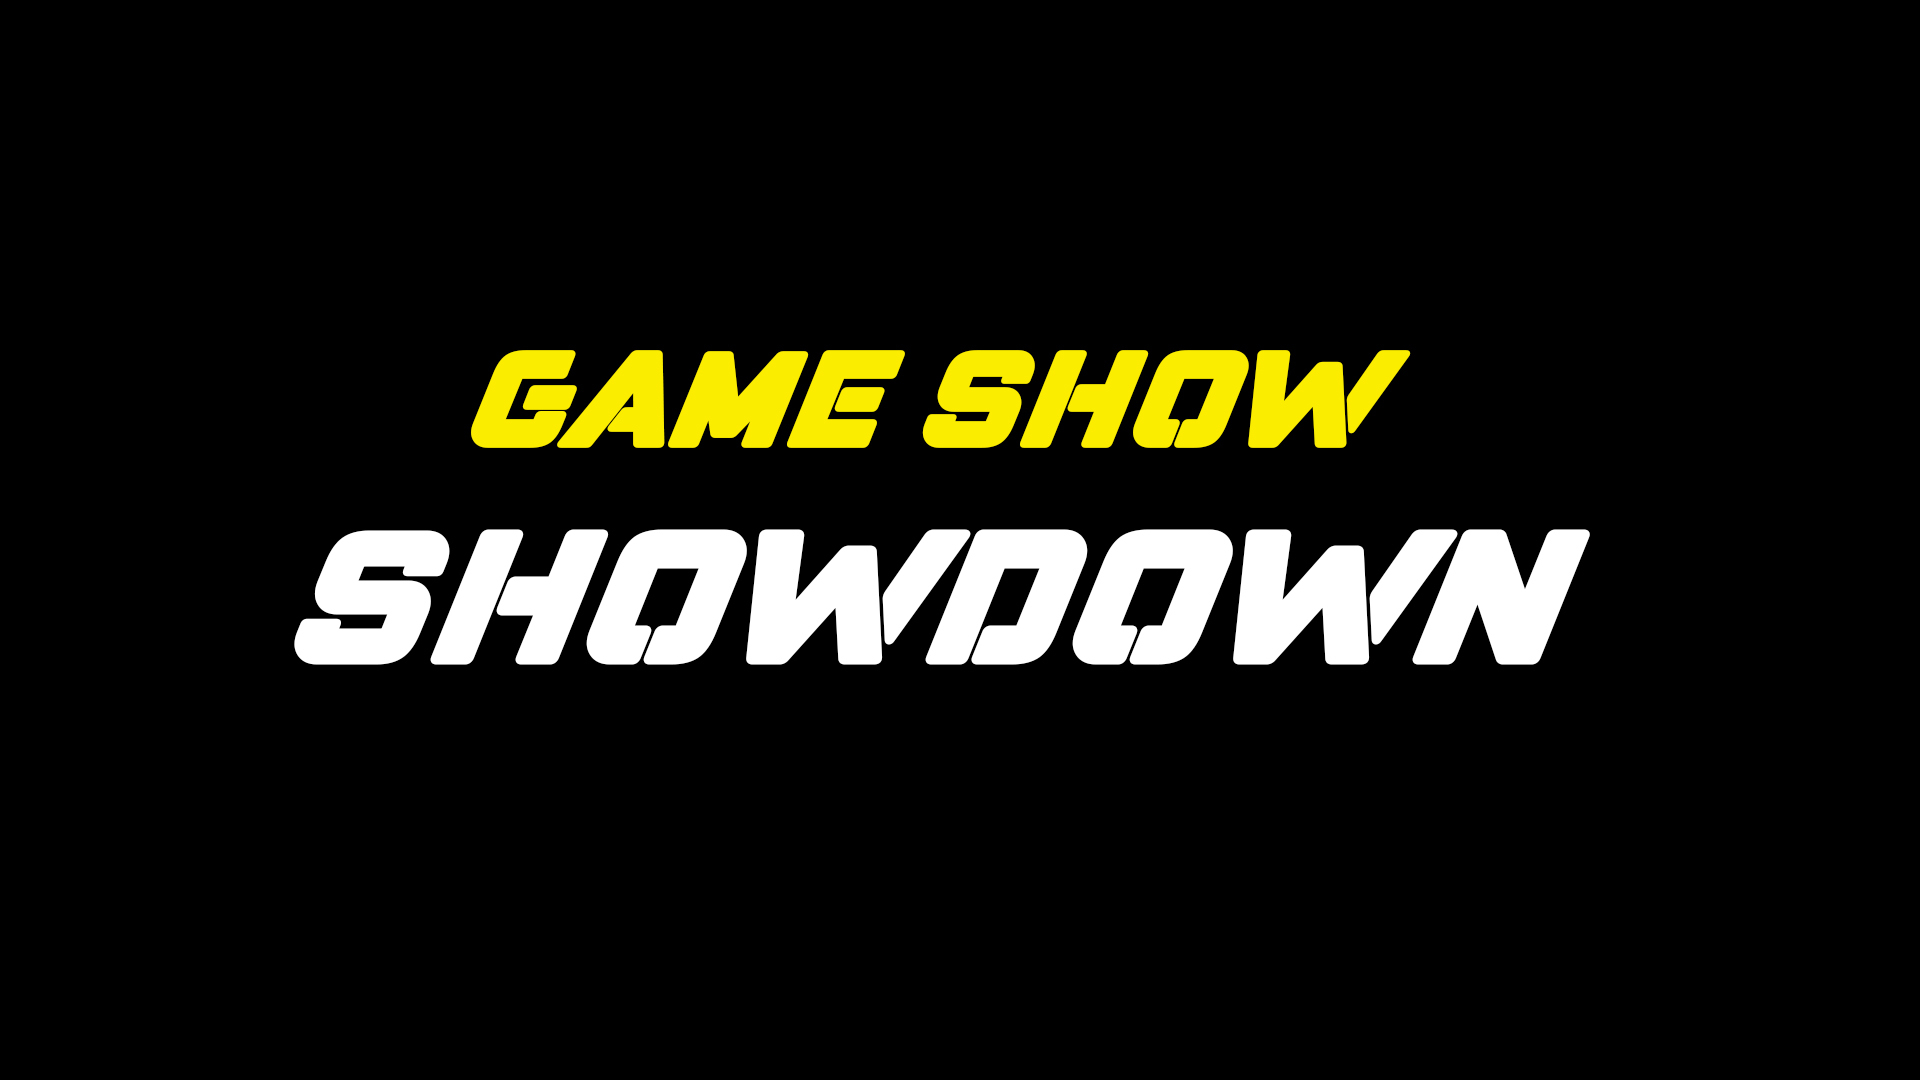 Game Show SHOWDOWN - Game On Escapes & More